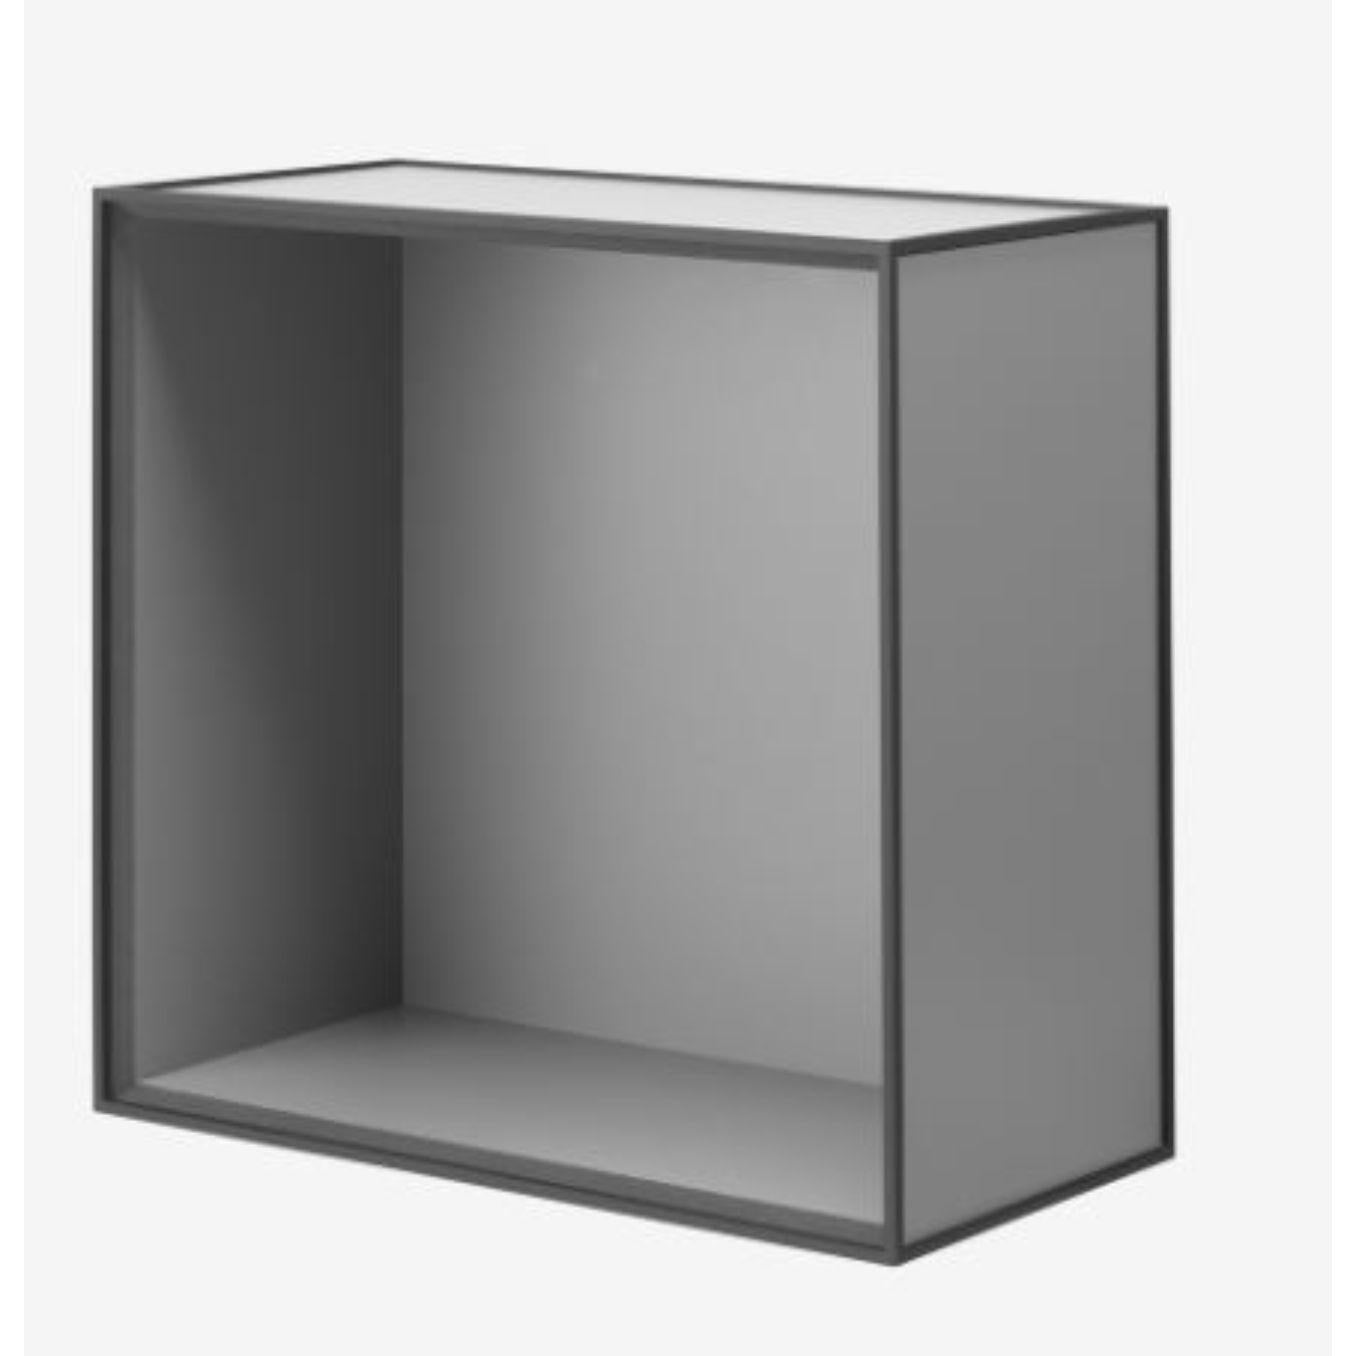 42 dark grey frame box by Lassen
Dimensions: d 42 x w 21 x h 42 cm 
Materials: Finér, Melamin, Melamin, Melamine, Metal, Veneer
Also available in different colors and dimensions. 
Weight: 10.5 Kg


By Lassen is a Danish design brand focused